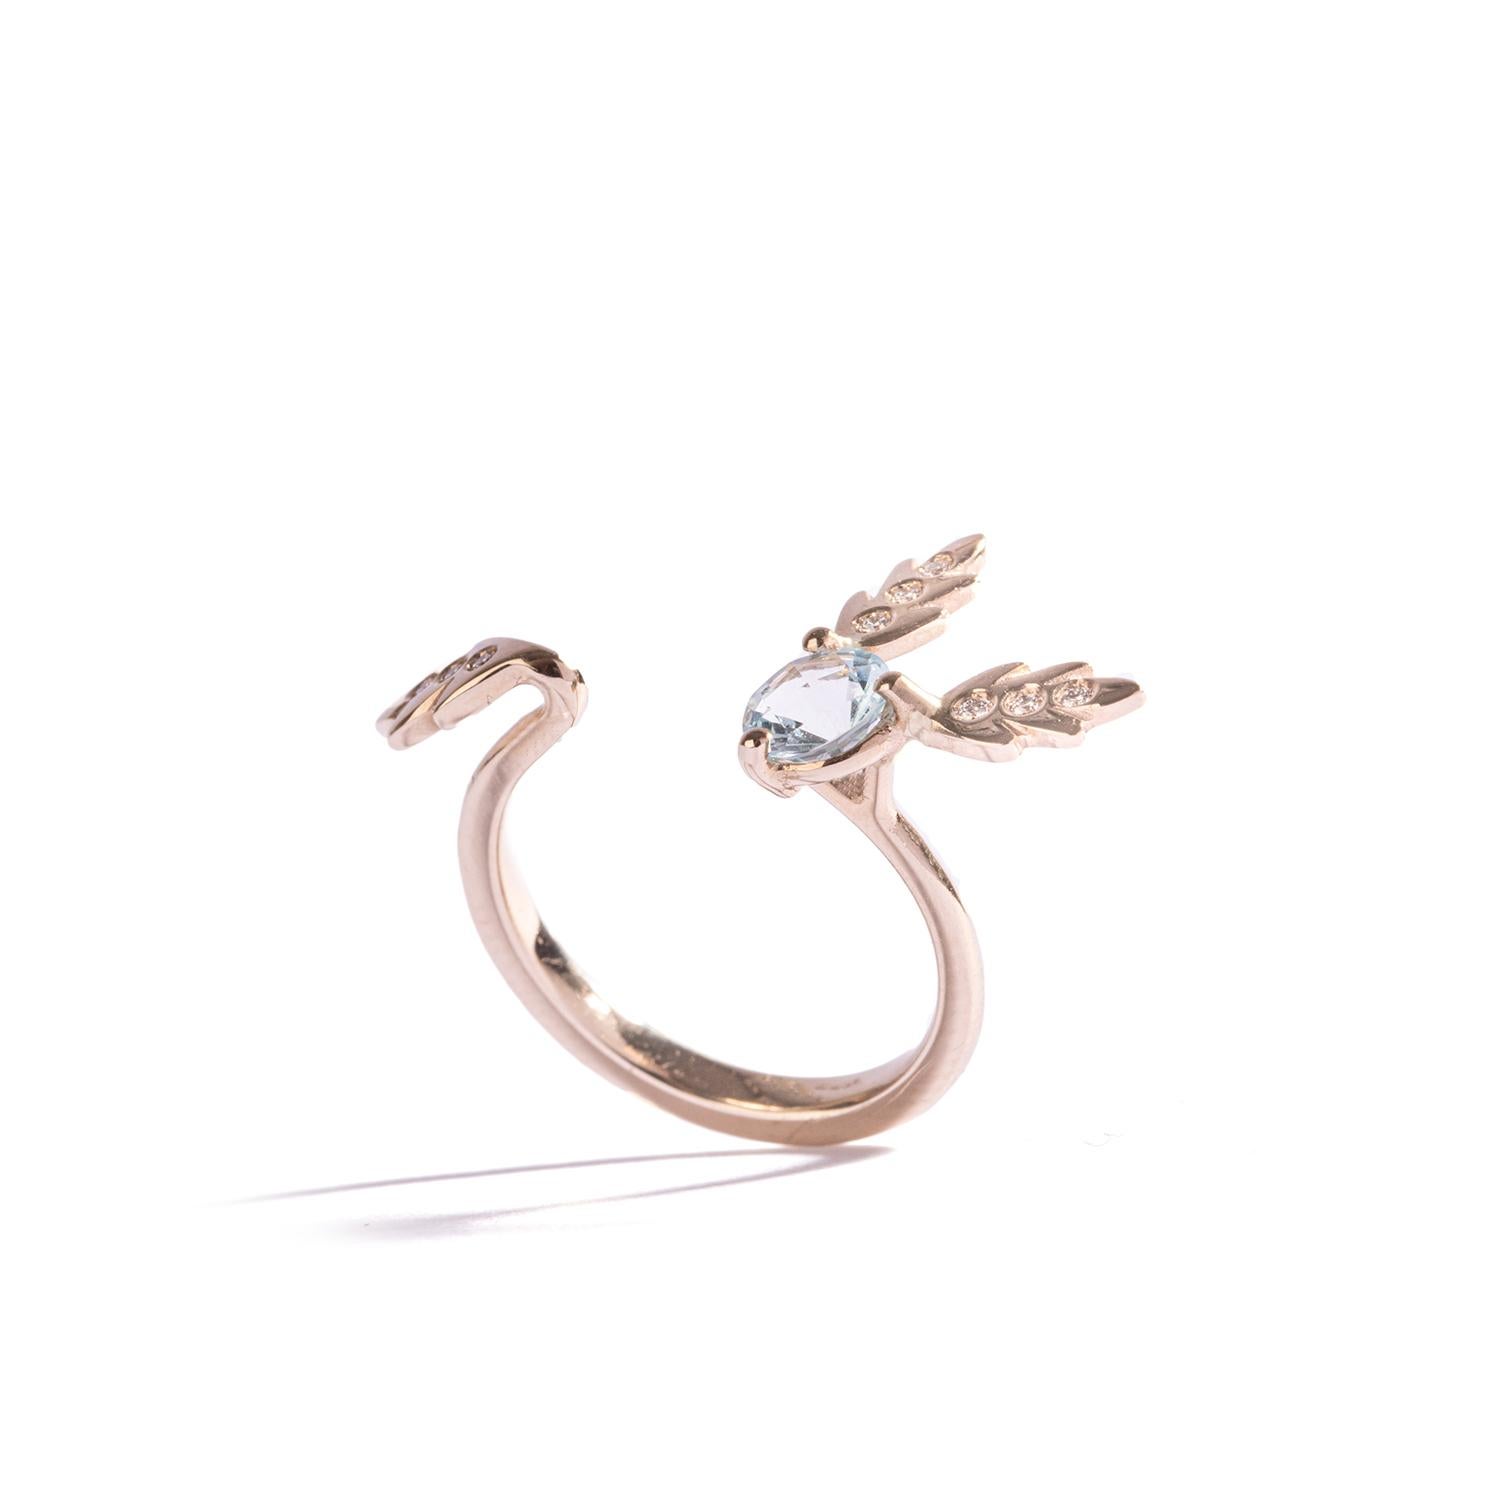 Three Leaves Ring by Regina Gambatesa at Second Petale Gallery

About the Gemstones:

Gold 18 kt, white gold
Diamonds ct. 0,07
Blue Topaz

ABOUT the CREATOR
REGINA GAMBATESA : AN ARTIST OF SPIRIT AND FORM
Regina Gambatesa is a jewelry artist who